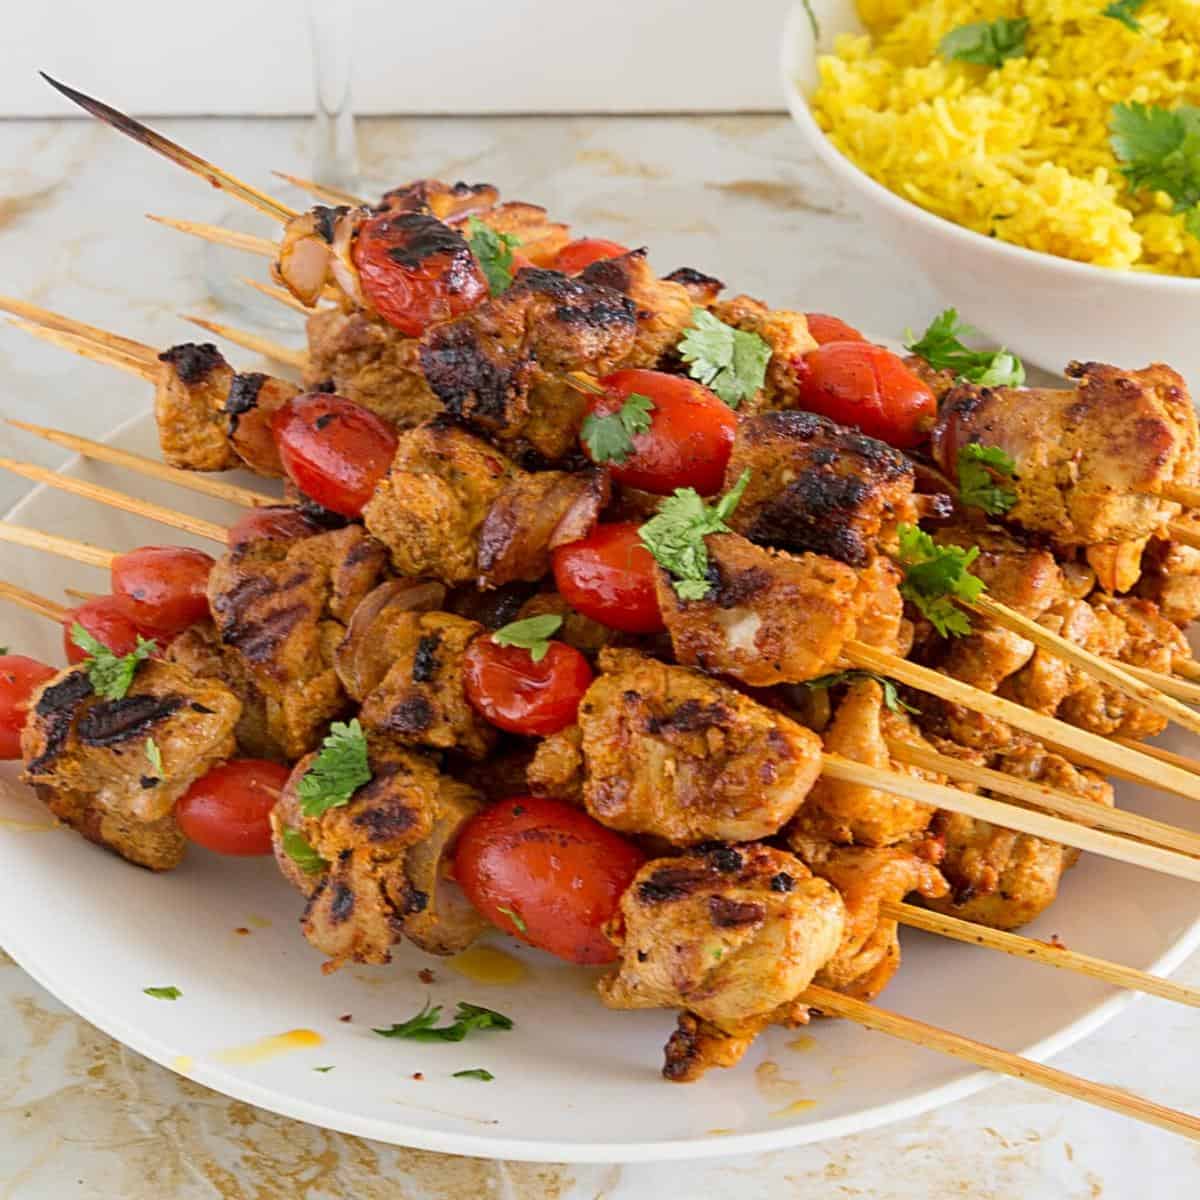 Stack of chicken kebabs on the table with rice.